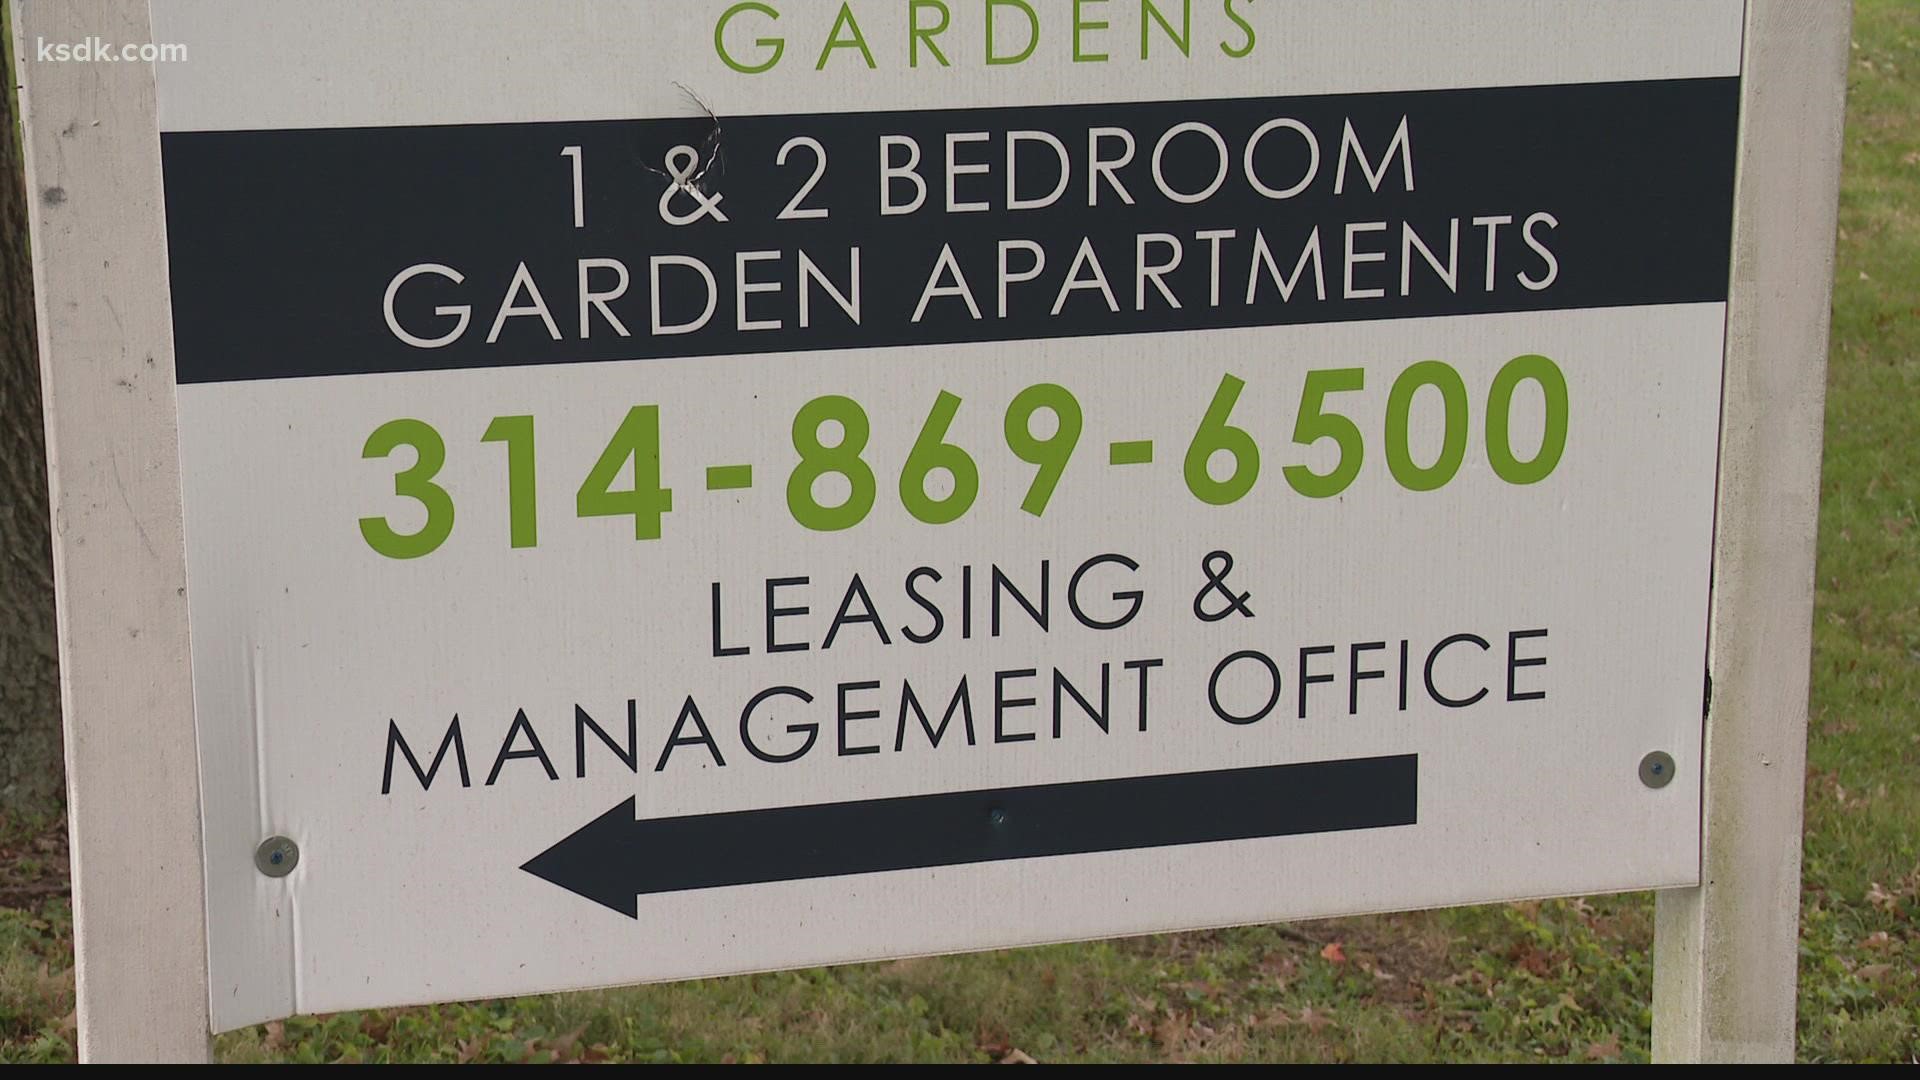 Pleasant View Gardens Apartments' tenants hope the new staff will fix leaks, mold and sewage problems that have been going on for months.